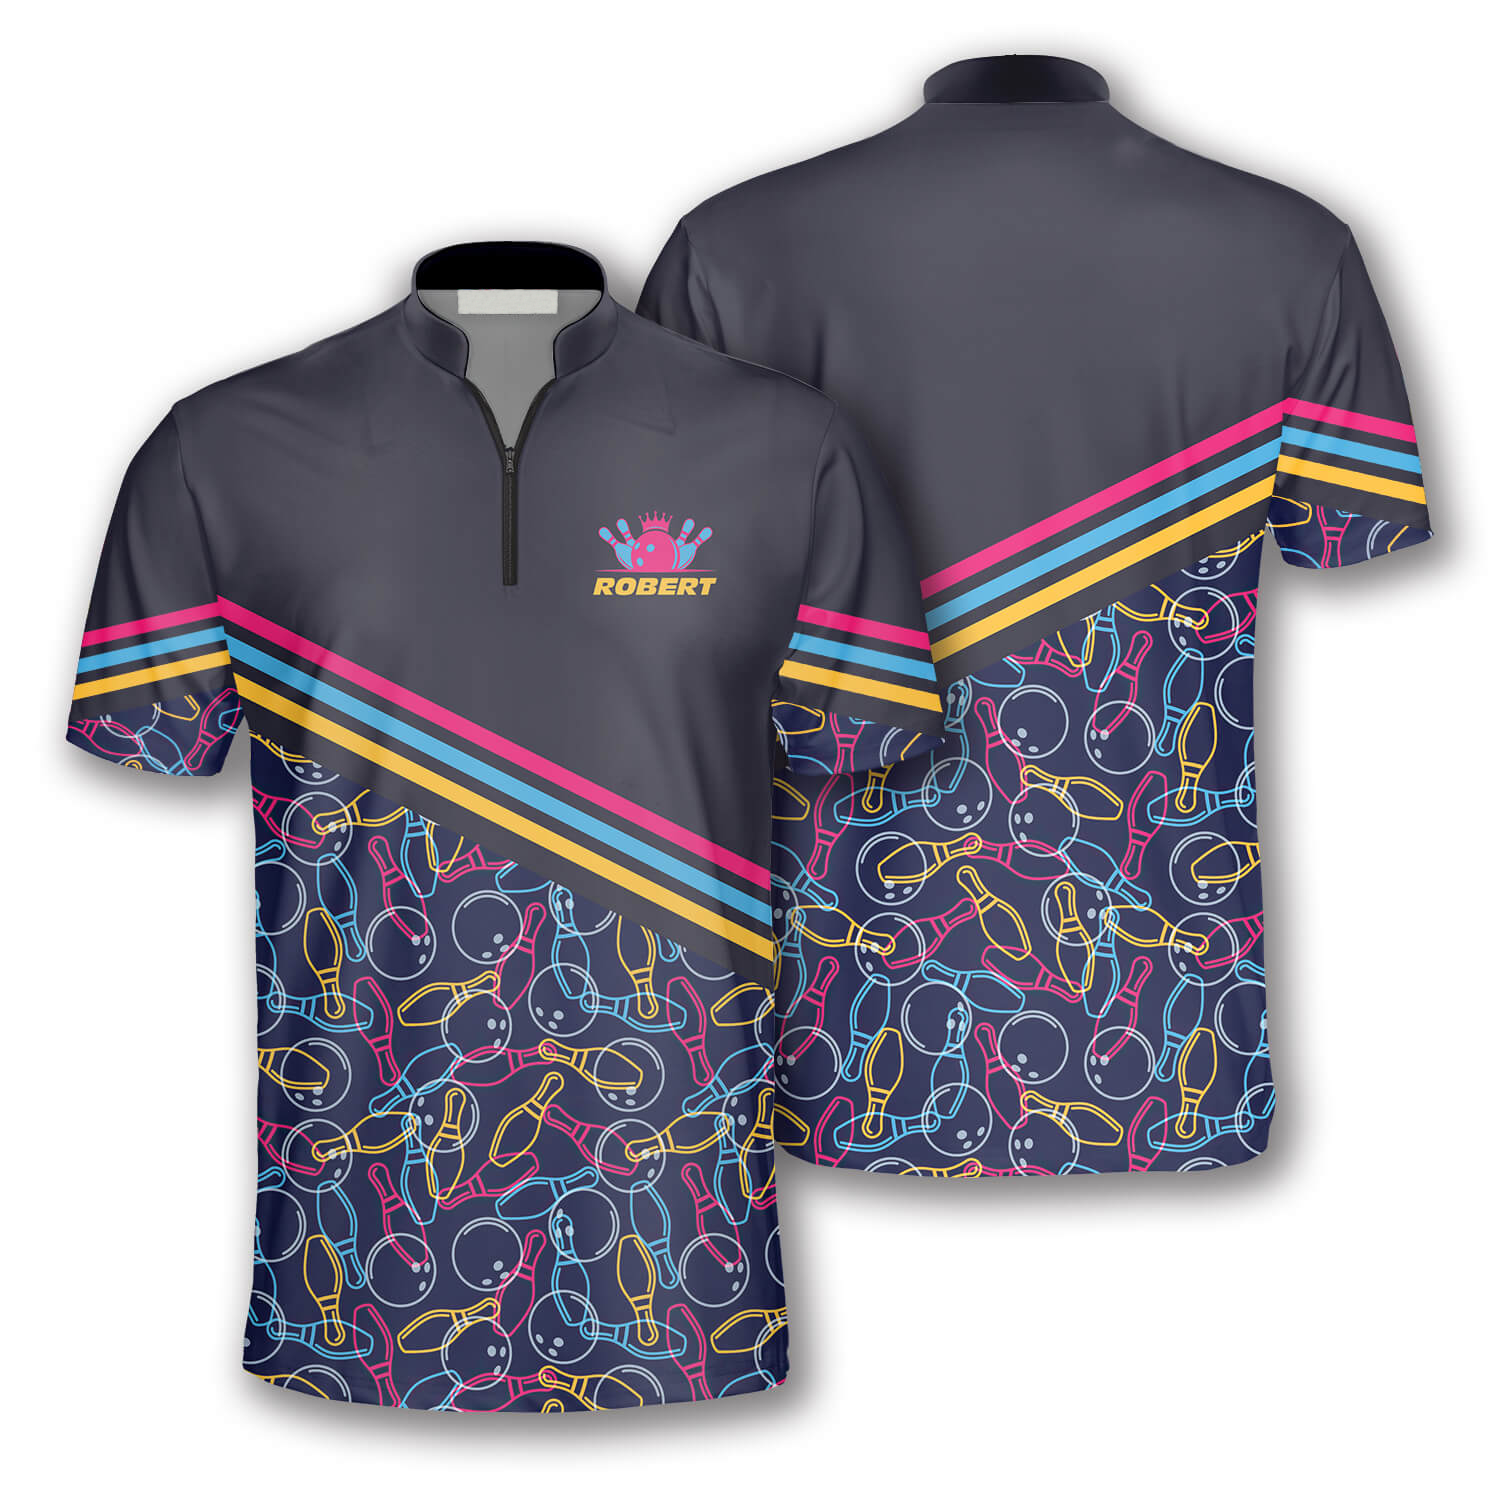 3D All Over Print Bowling Pattern In Navy and Black Custom Bowling Jerseys for Men/ Cool Shirt for Bowling Lover